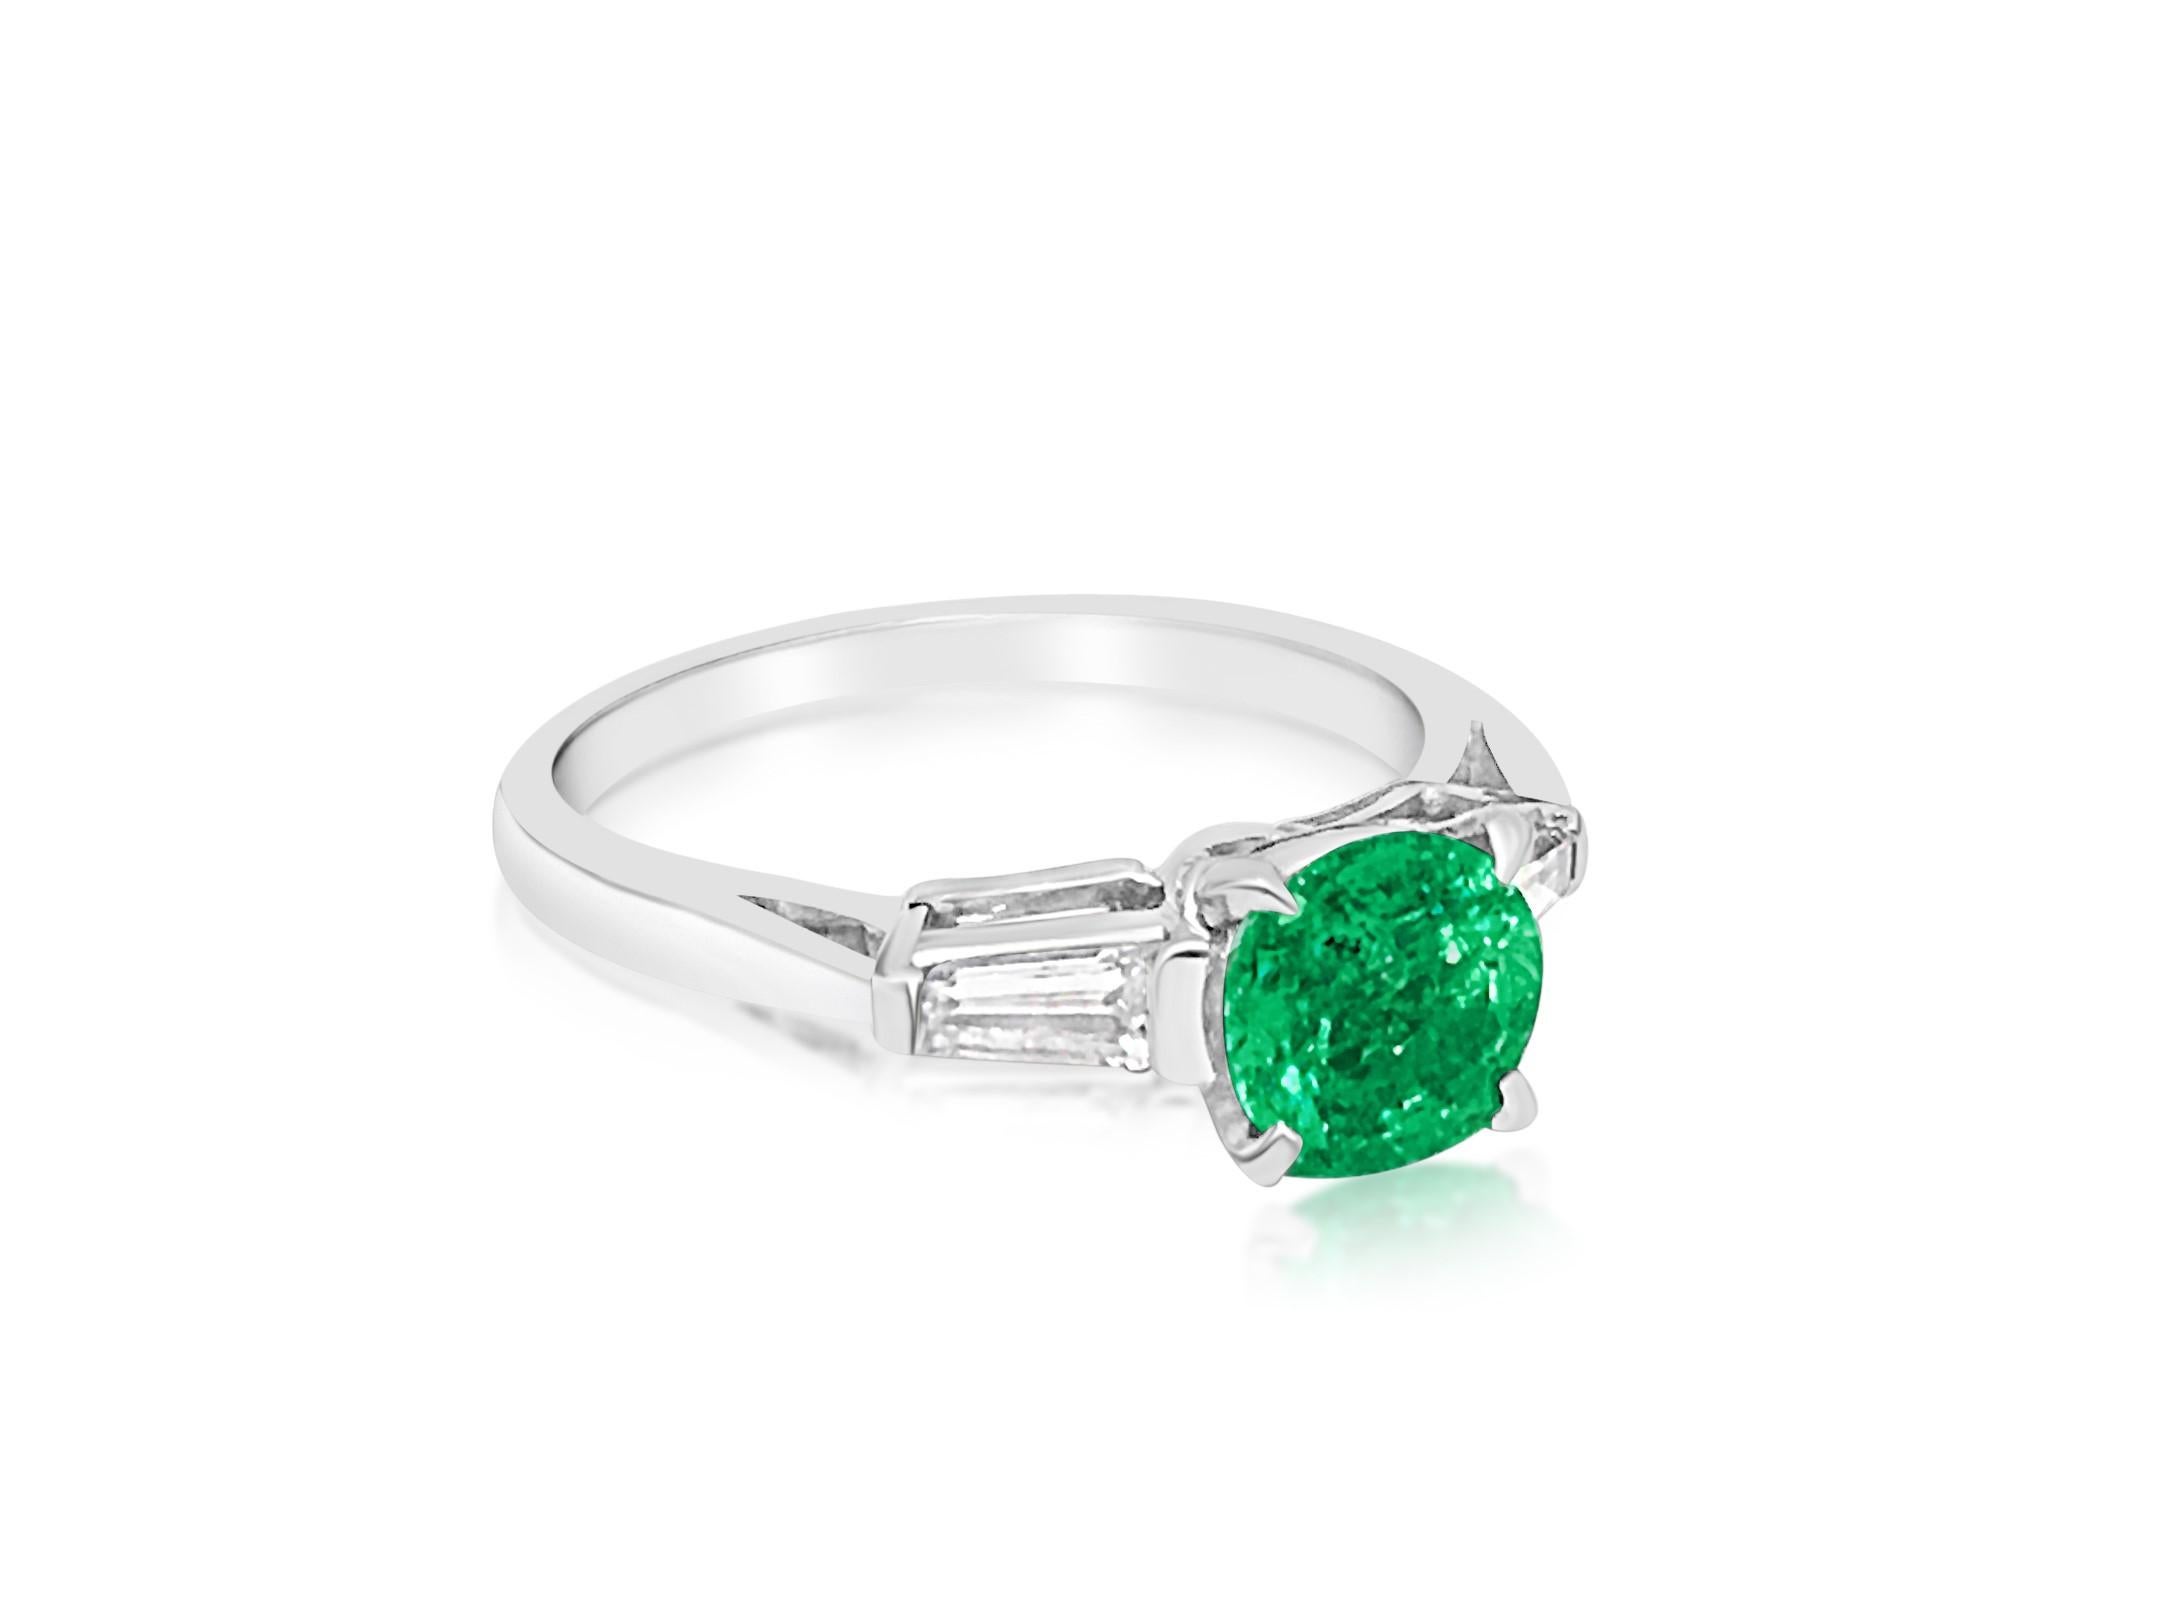 Metal: Platinum 900. 
1.50 carat emerald. Round shape emerald set in prongs. Excellent saturation and color. 
0.30cts diamonds total. VVS clarity and F color. Baguette cut. 
Total carat weight of all precious stones: 1.80cts. 
All stones are 100%